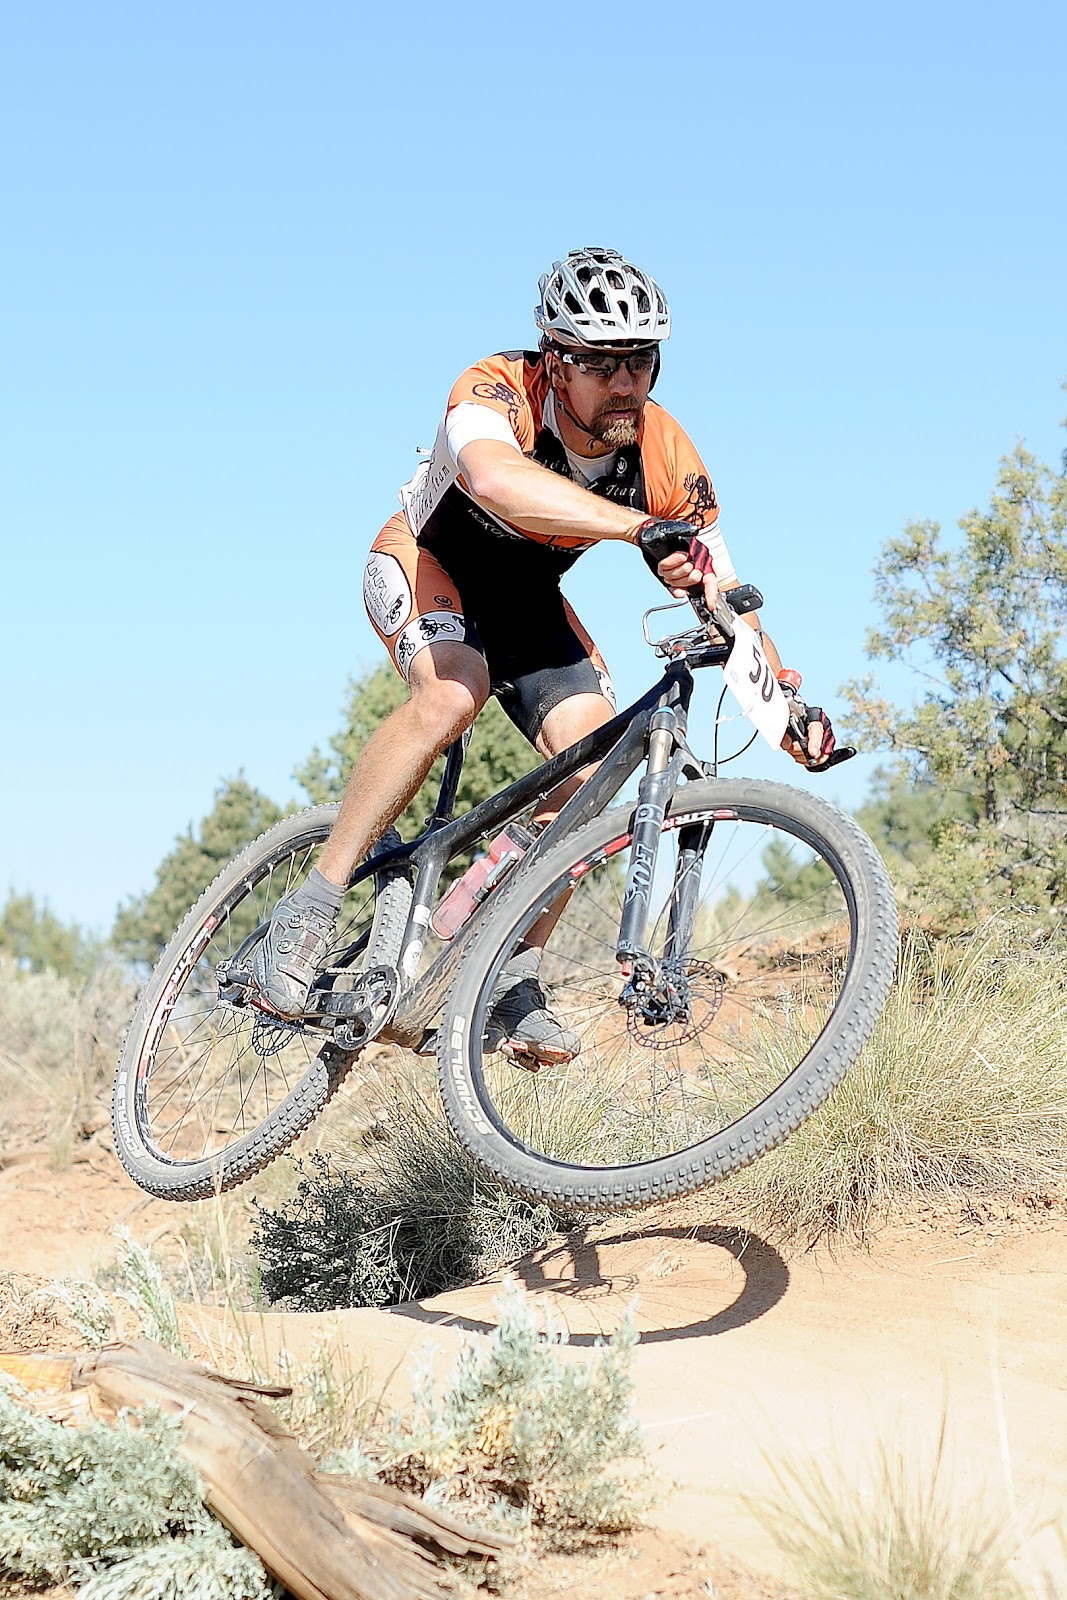 Shawn Gregory's Blog 12 Hours of Mesa Verde 2012 1st place overall